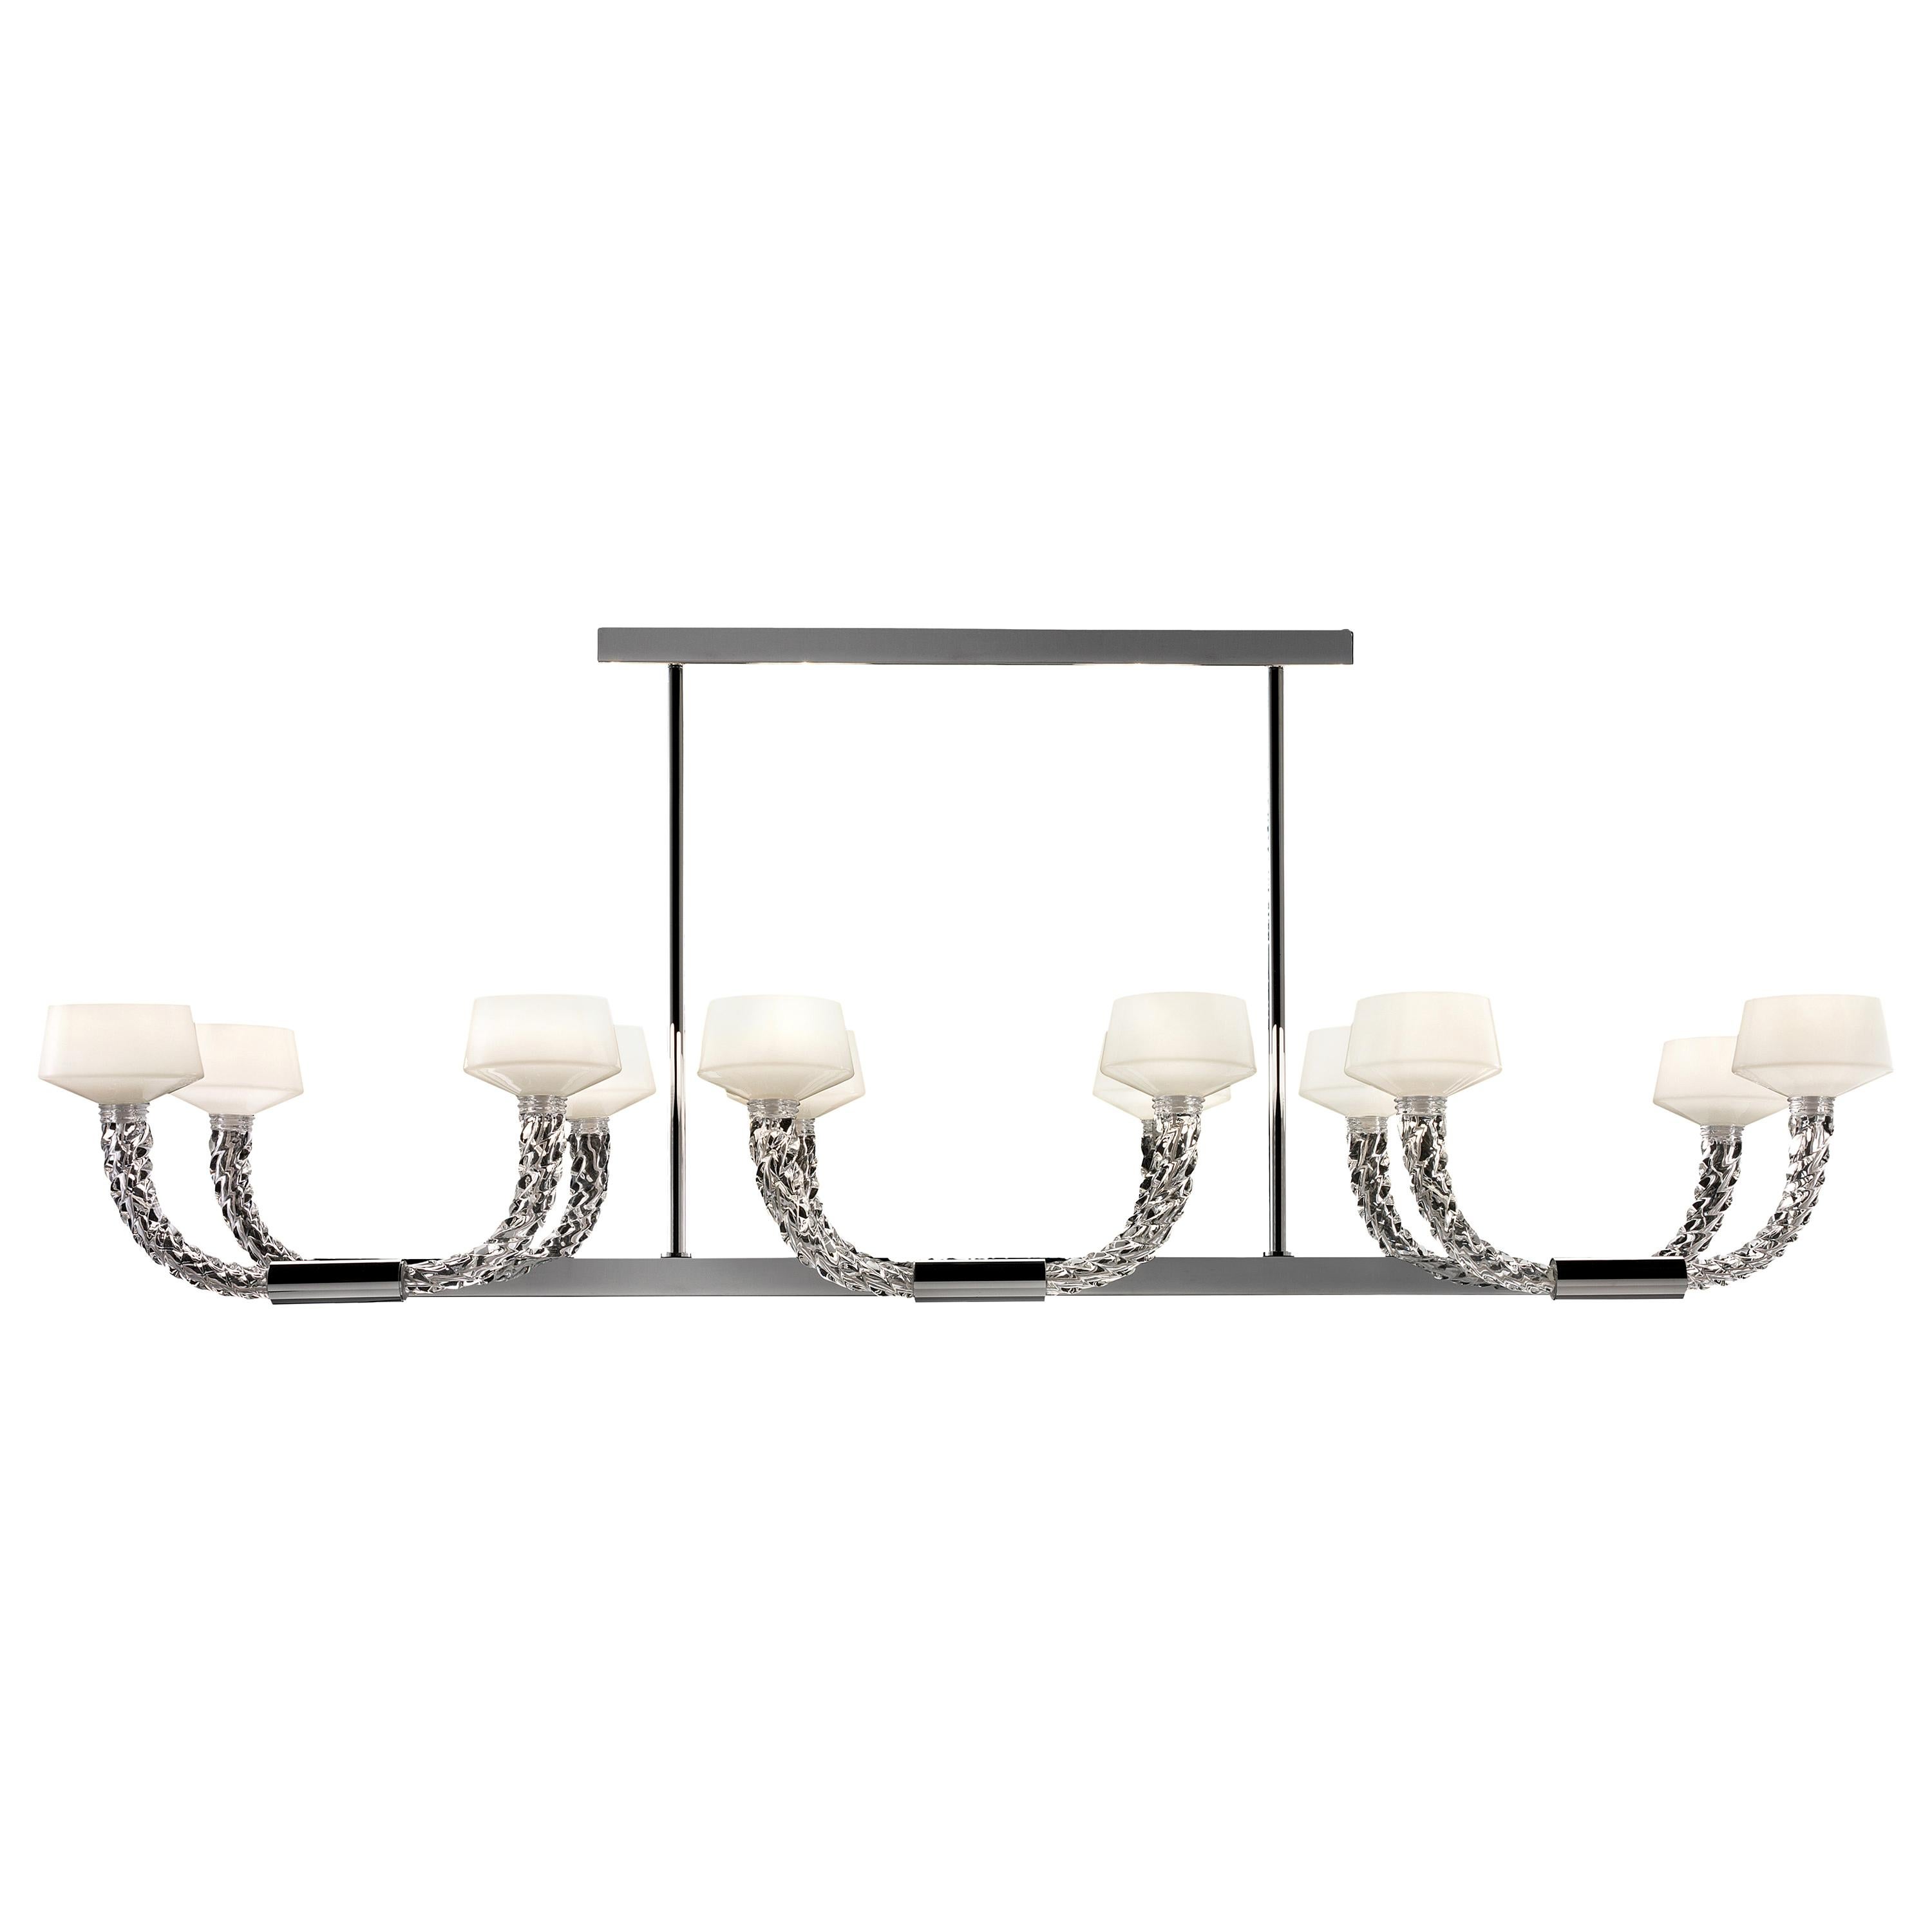 Twins 7226 12 Chandelier in Glass with Chrome Finishing, by Barovier&Toso